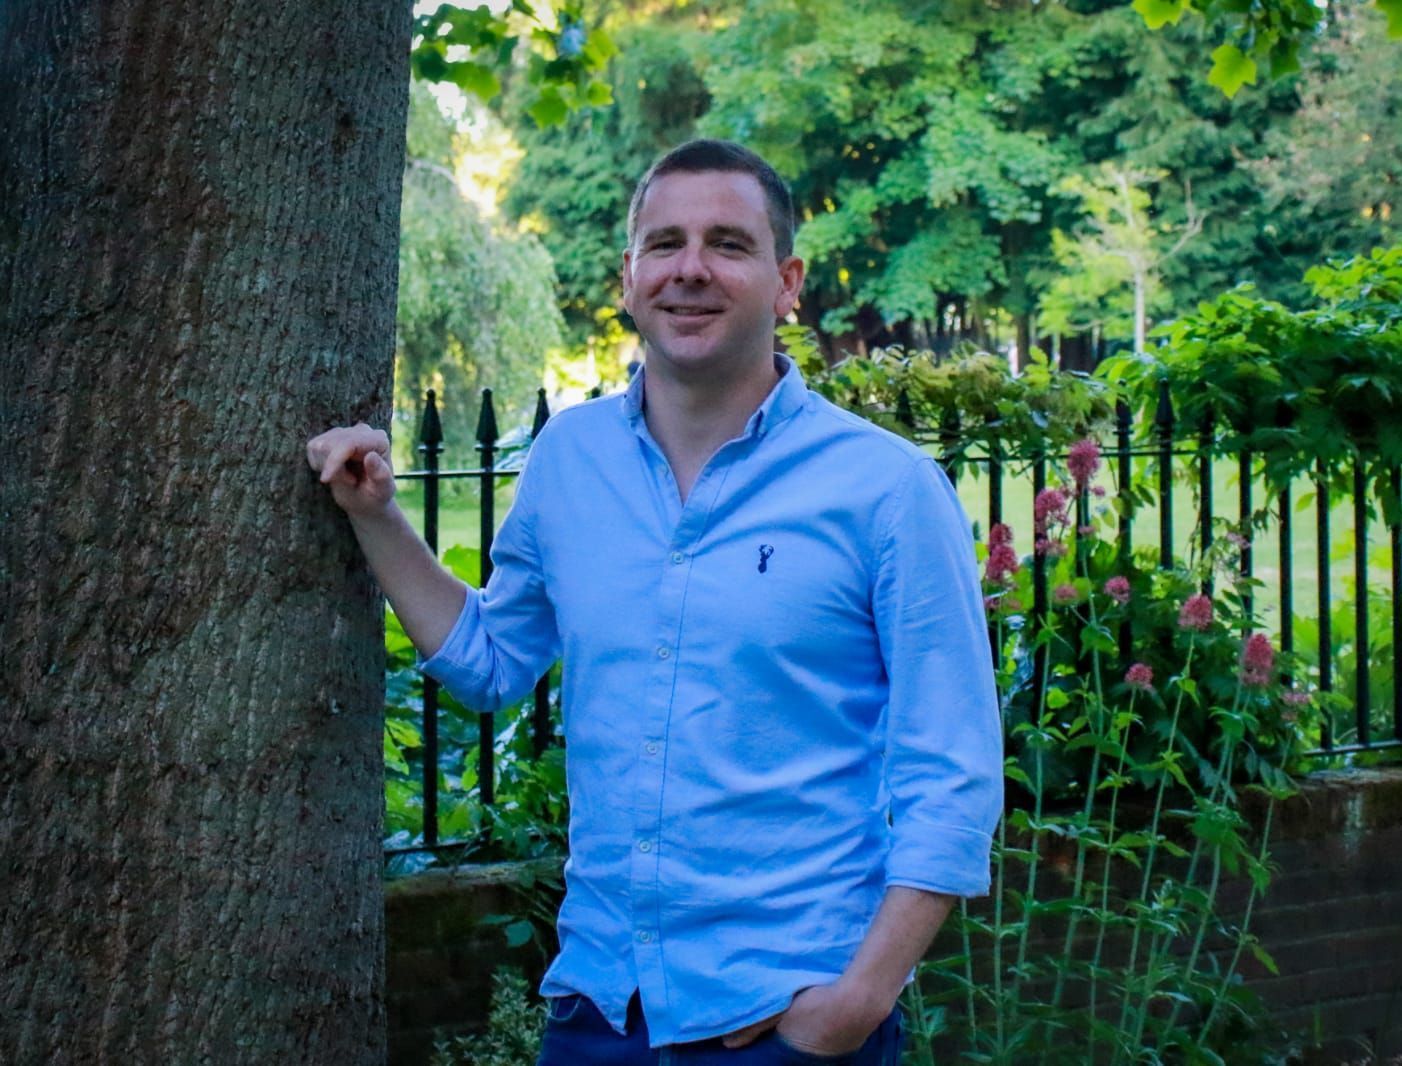 a man in a blue shirt is leaning against a tree in a park .